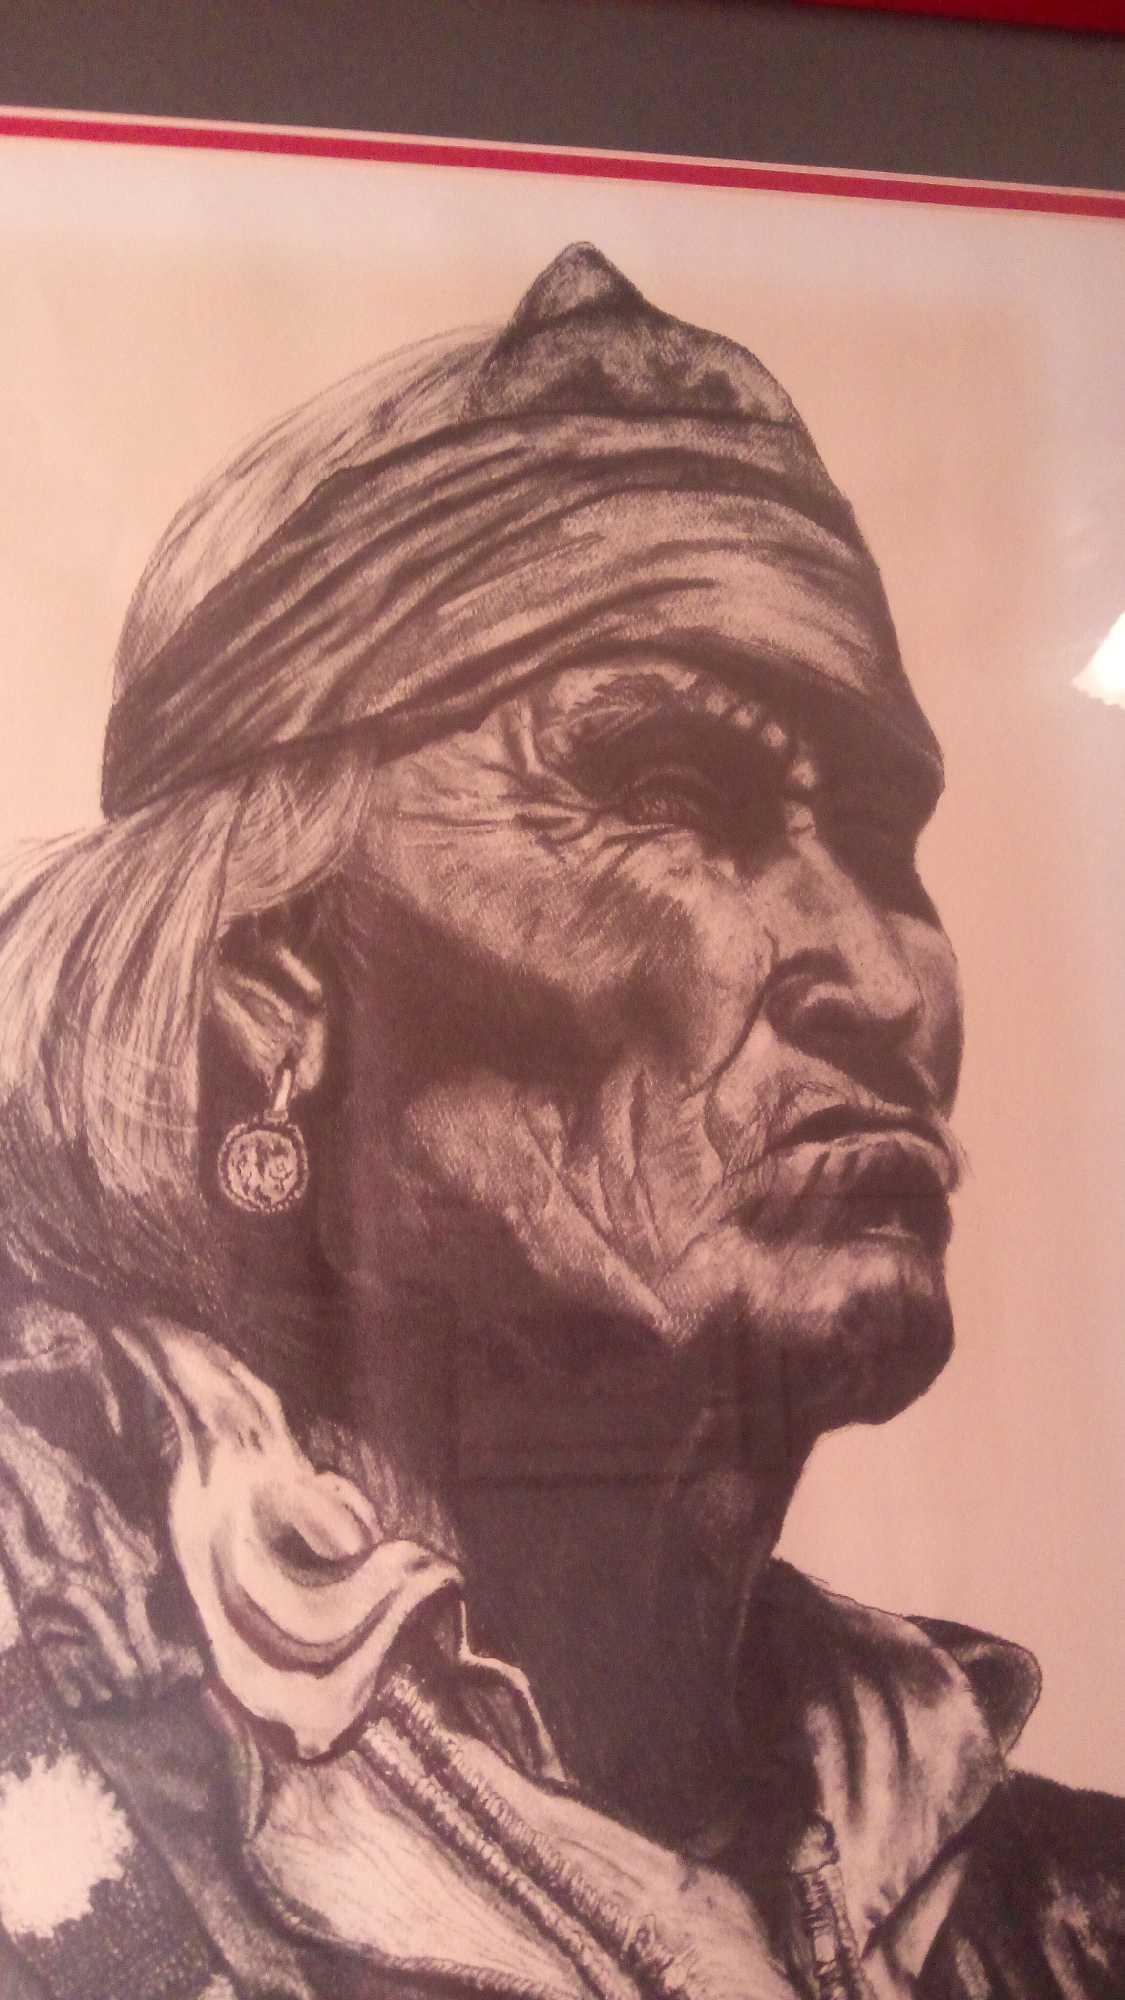 VAUGHN NATIVE AMERICAN FINE ART SIGNED AND NUMBERED TITLED NAVAJO